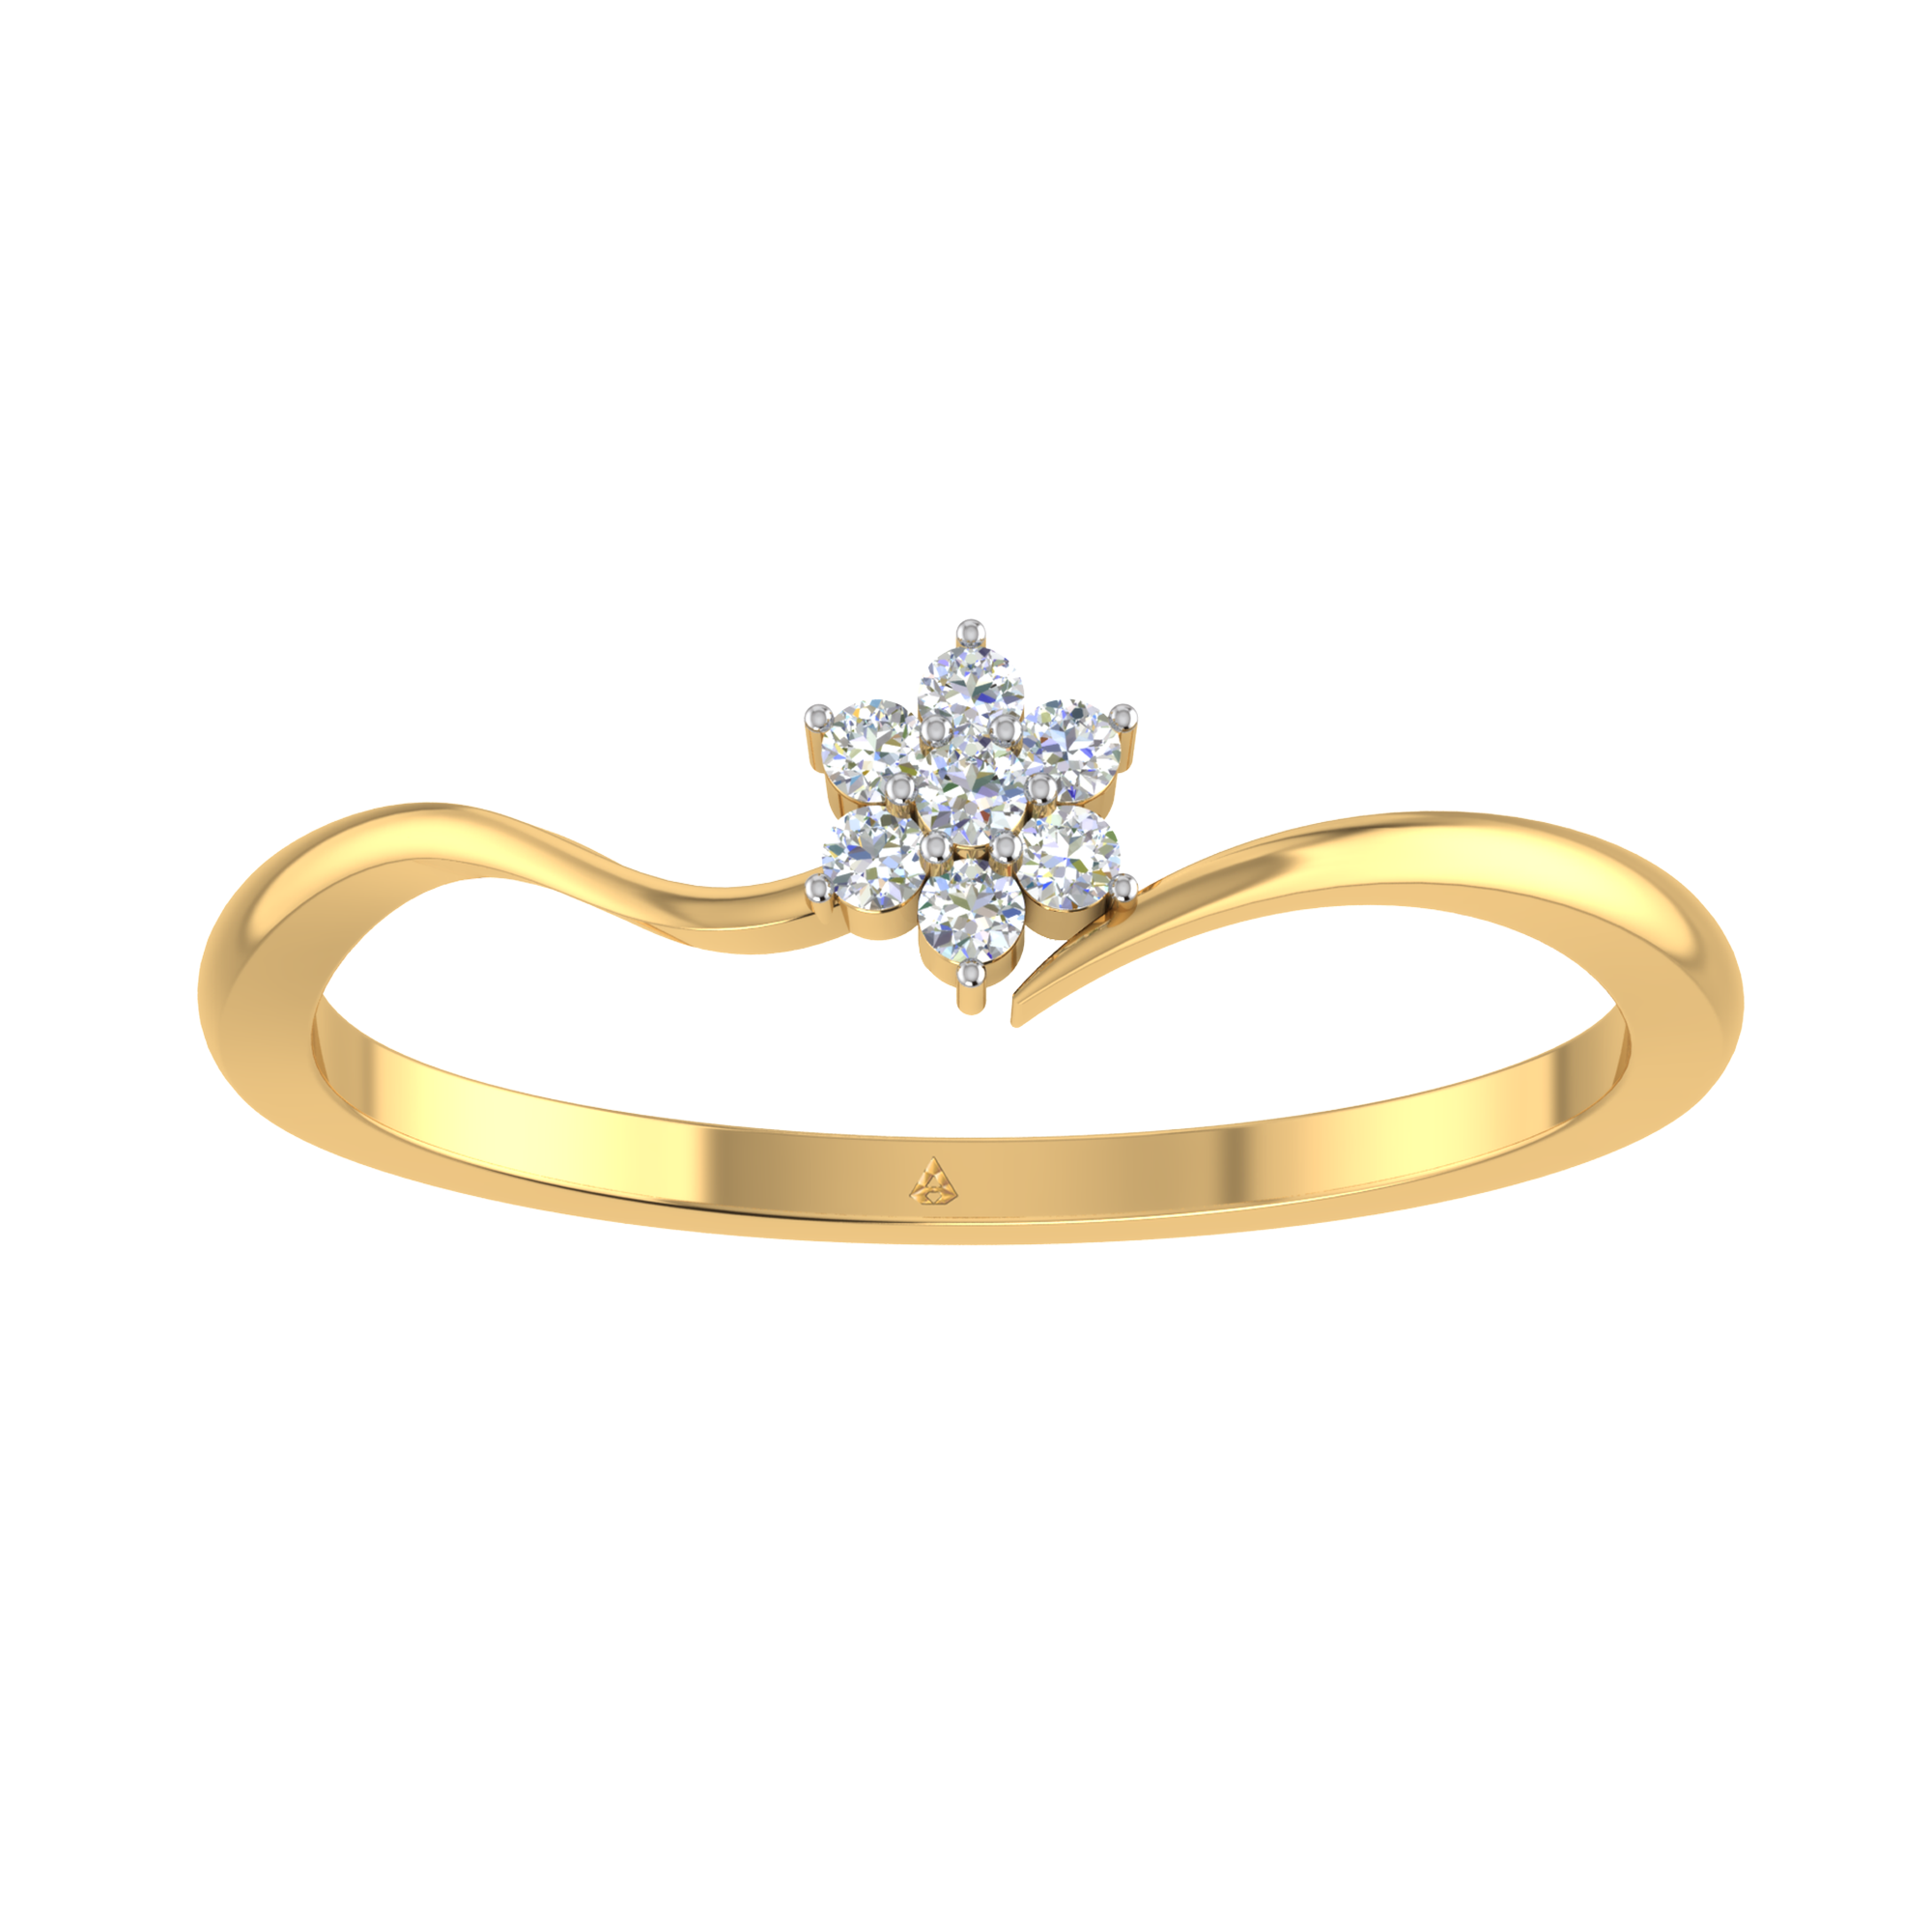 Few Things to Know Before Buying a Diamond Ring – Senco Gold and Diamonds